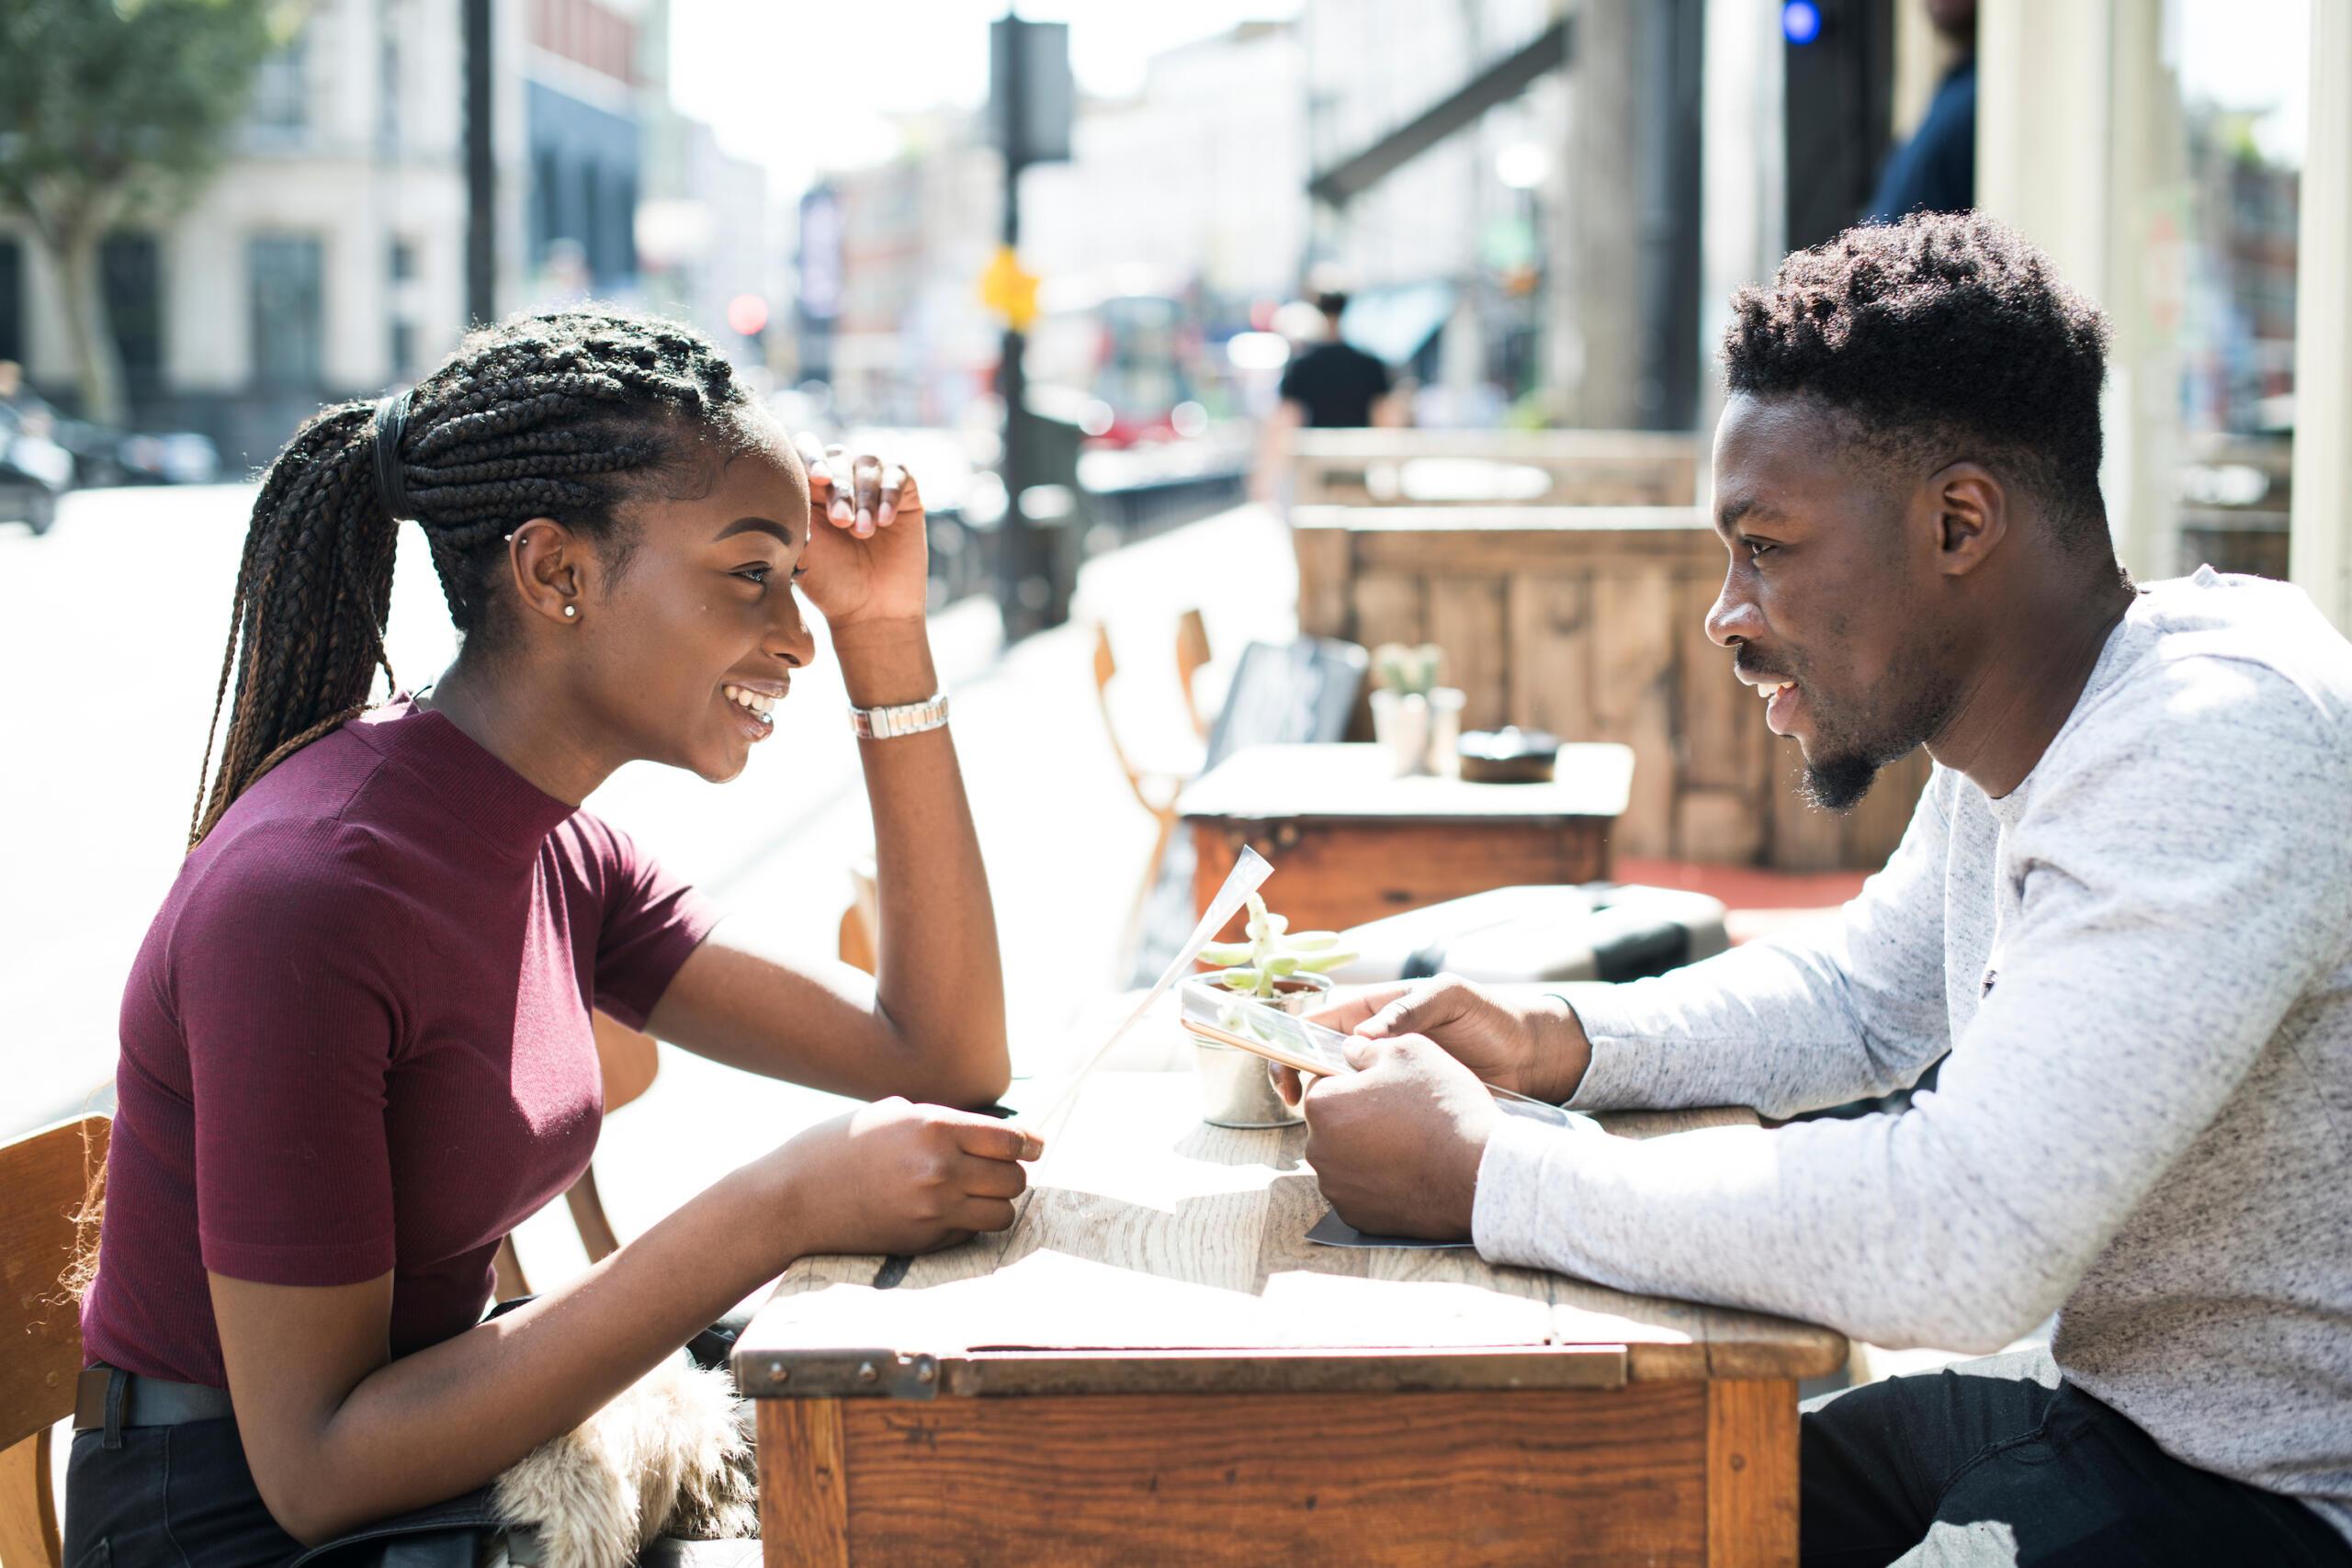 About to Go on a First Date? Here Are Some Great Conversation Starters